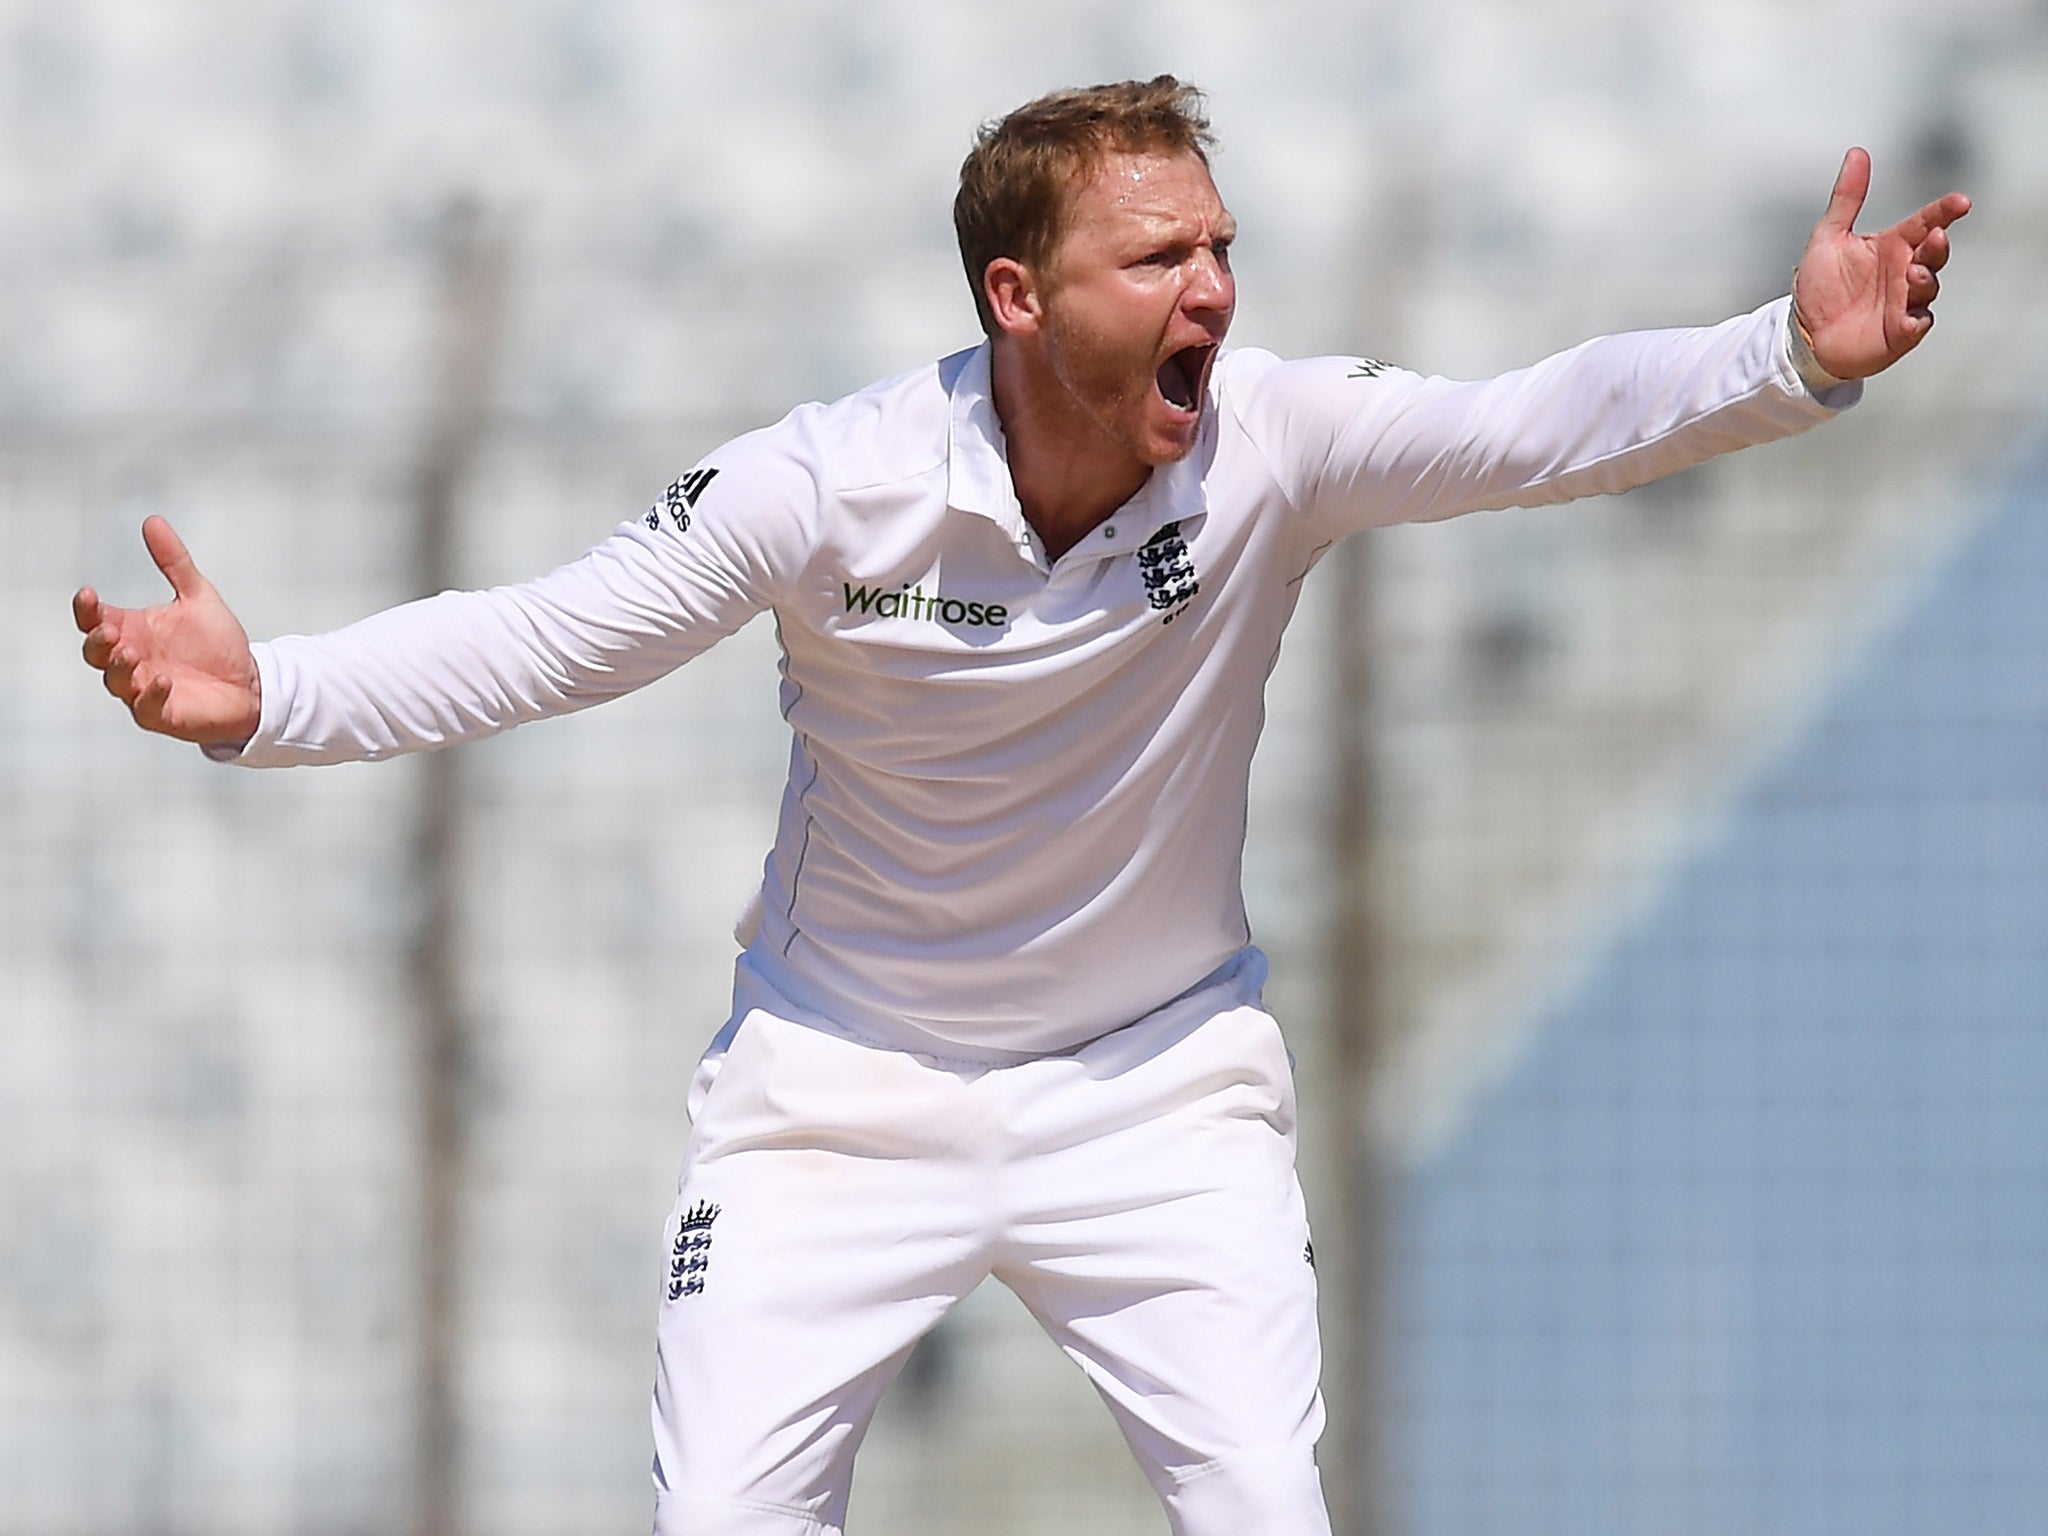 Gareth Batty took four wickets for 65 runs to lead England's attack in Bangladesh's second innings